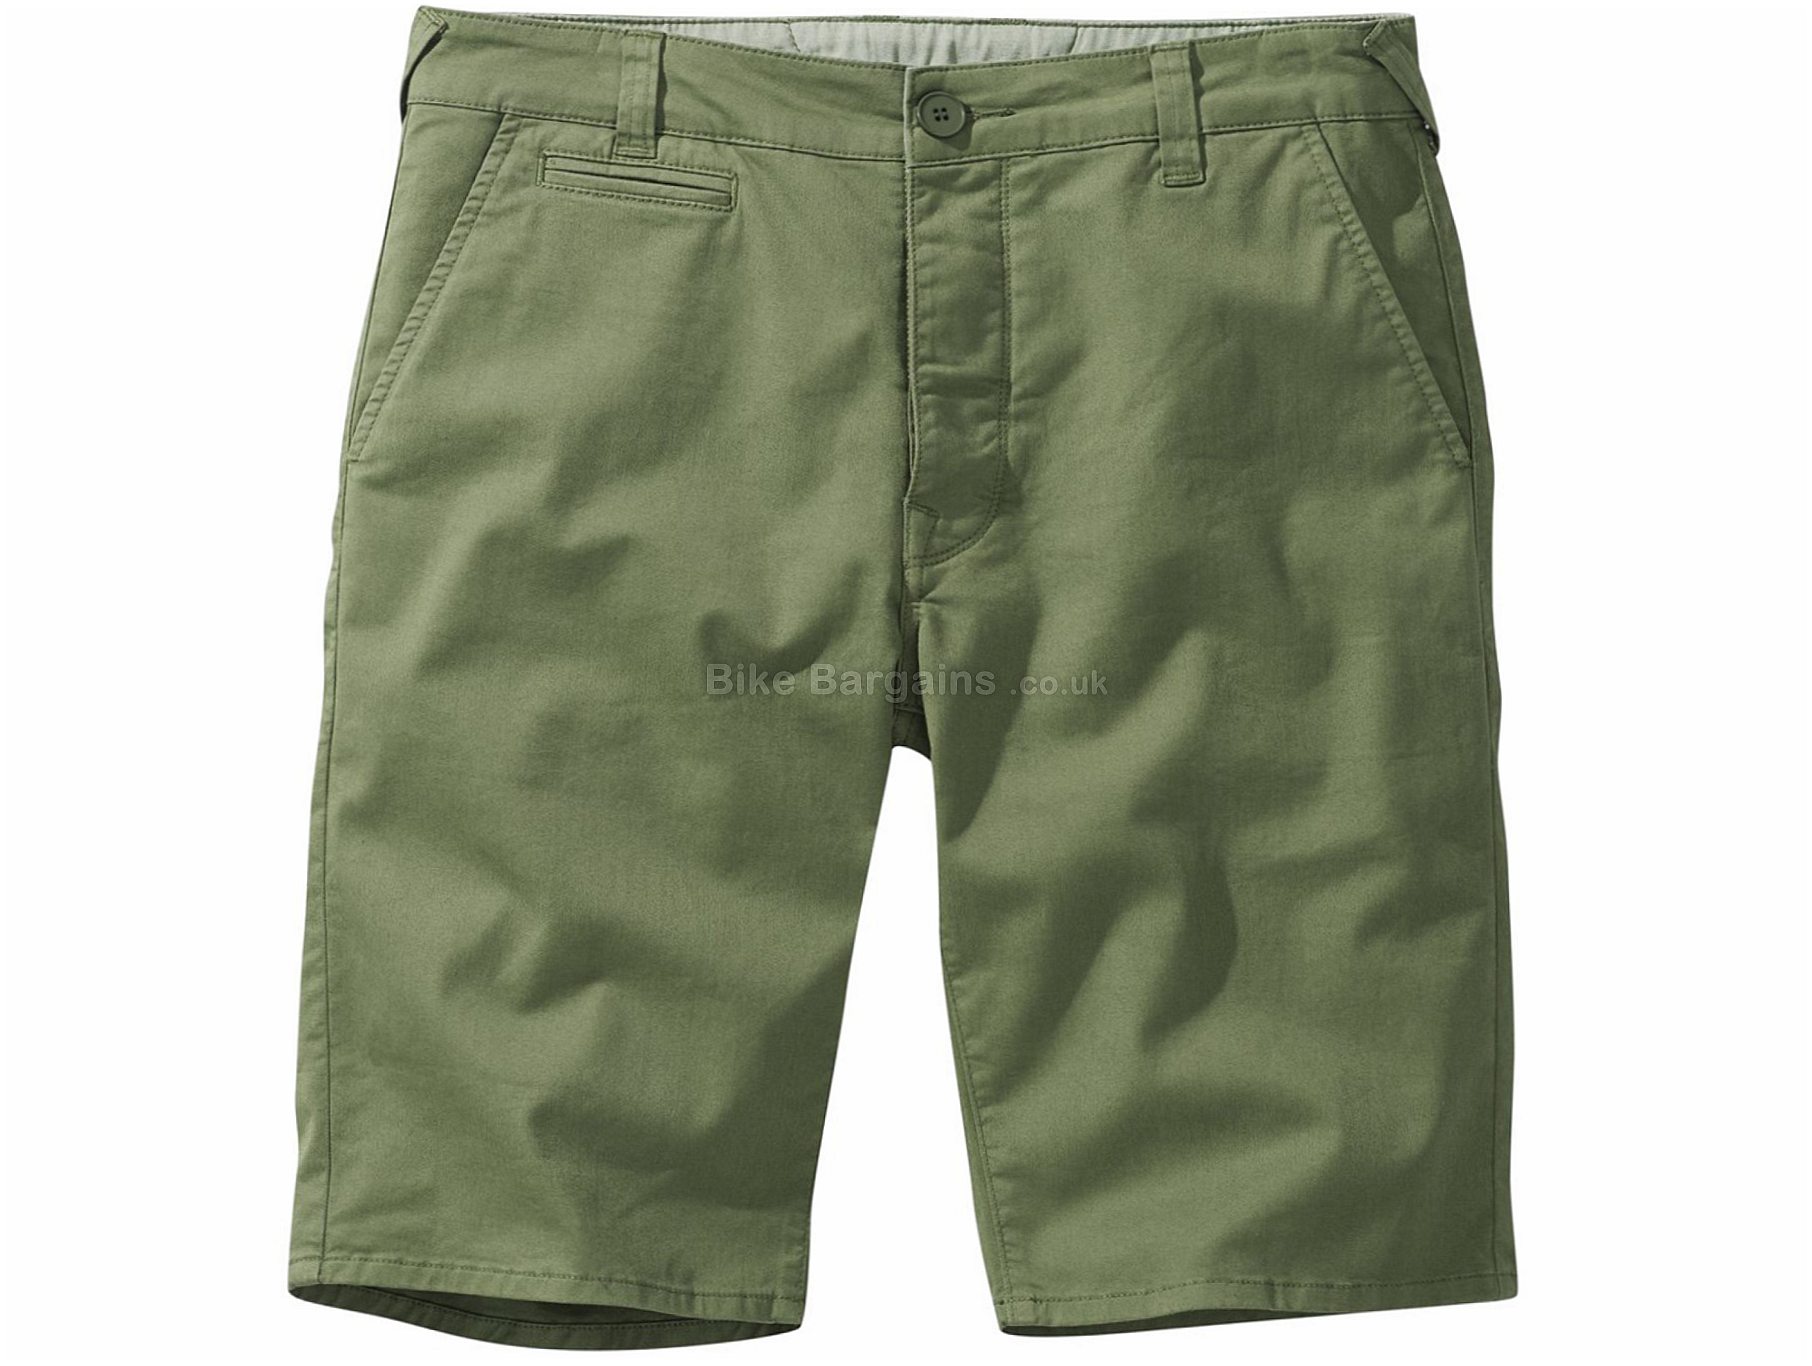 Howies Chada Strech Chino Shorts (Expired) was £27